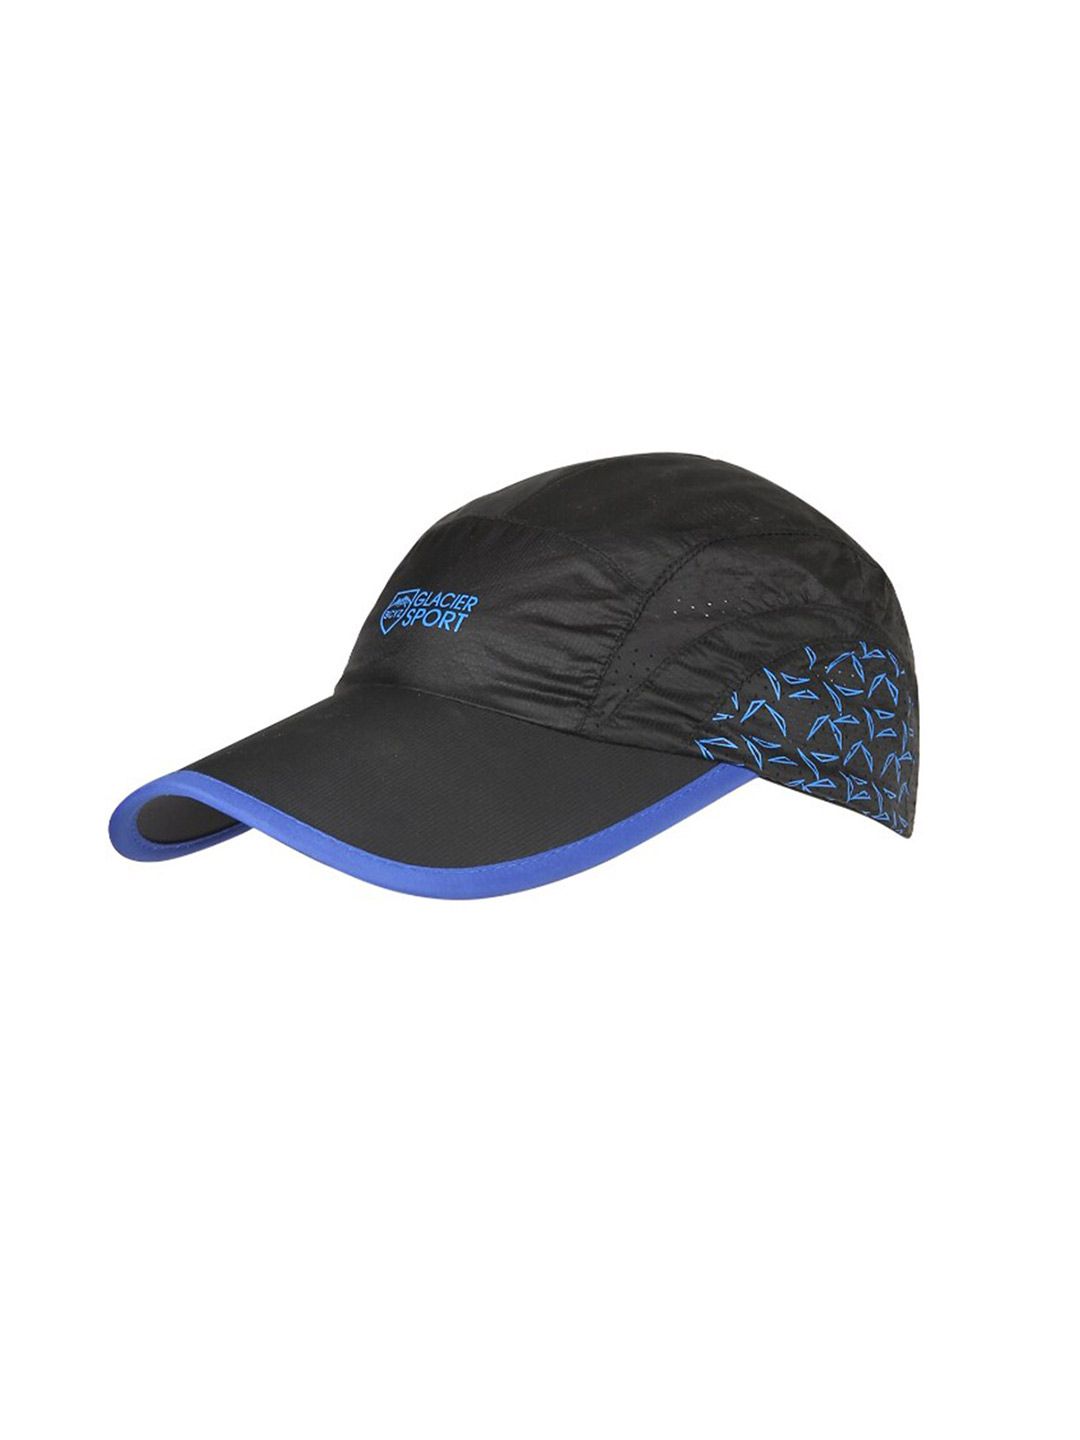 iSWEVEN Unisex Black & Blue Printed Baseball Cap Price in India